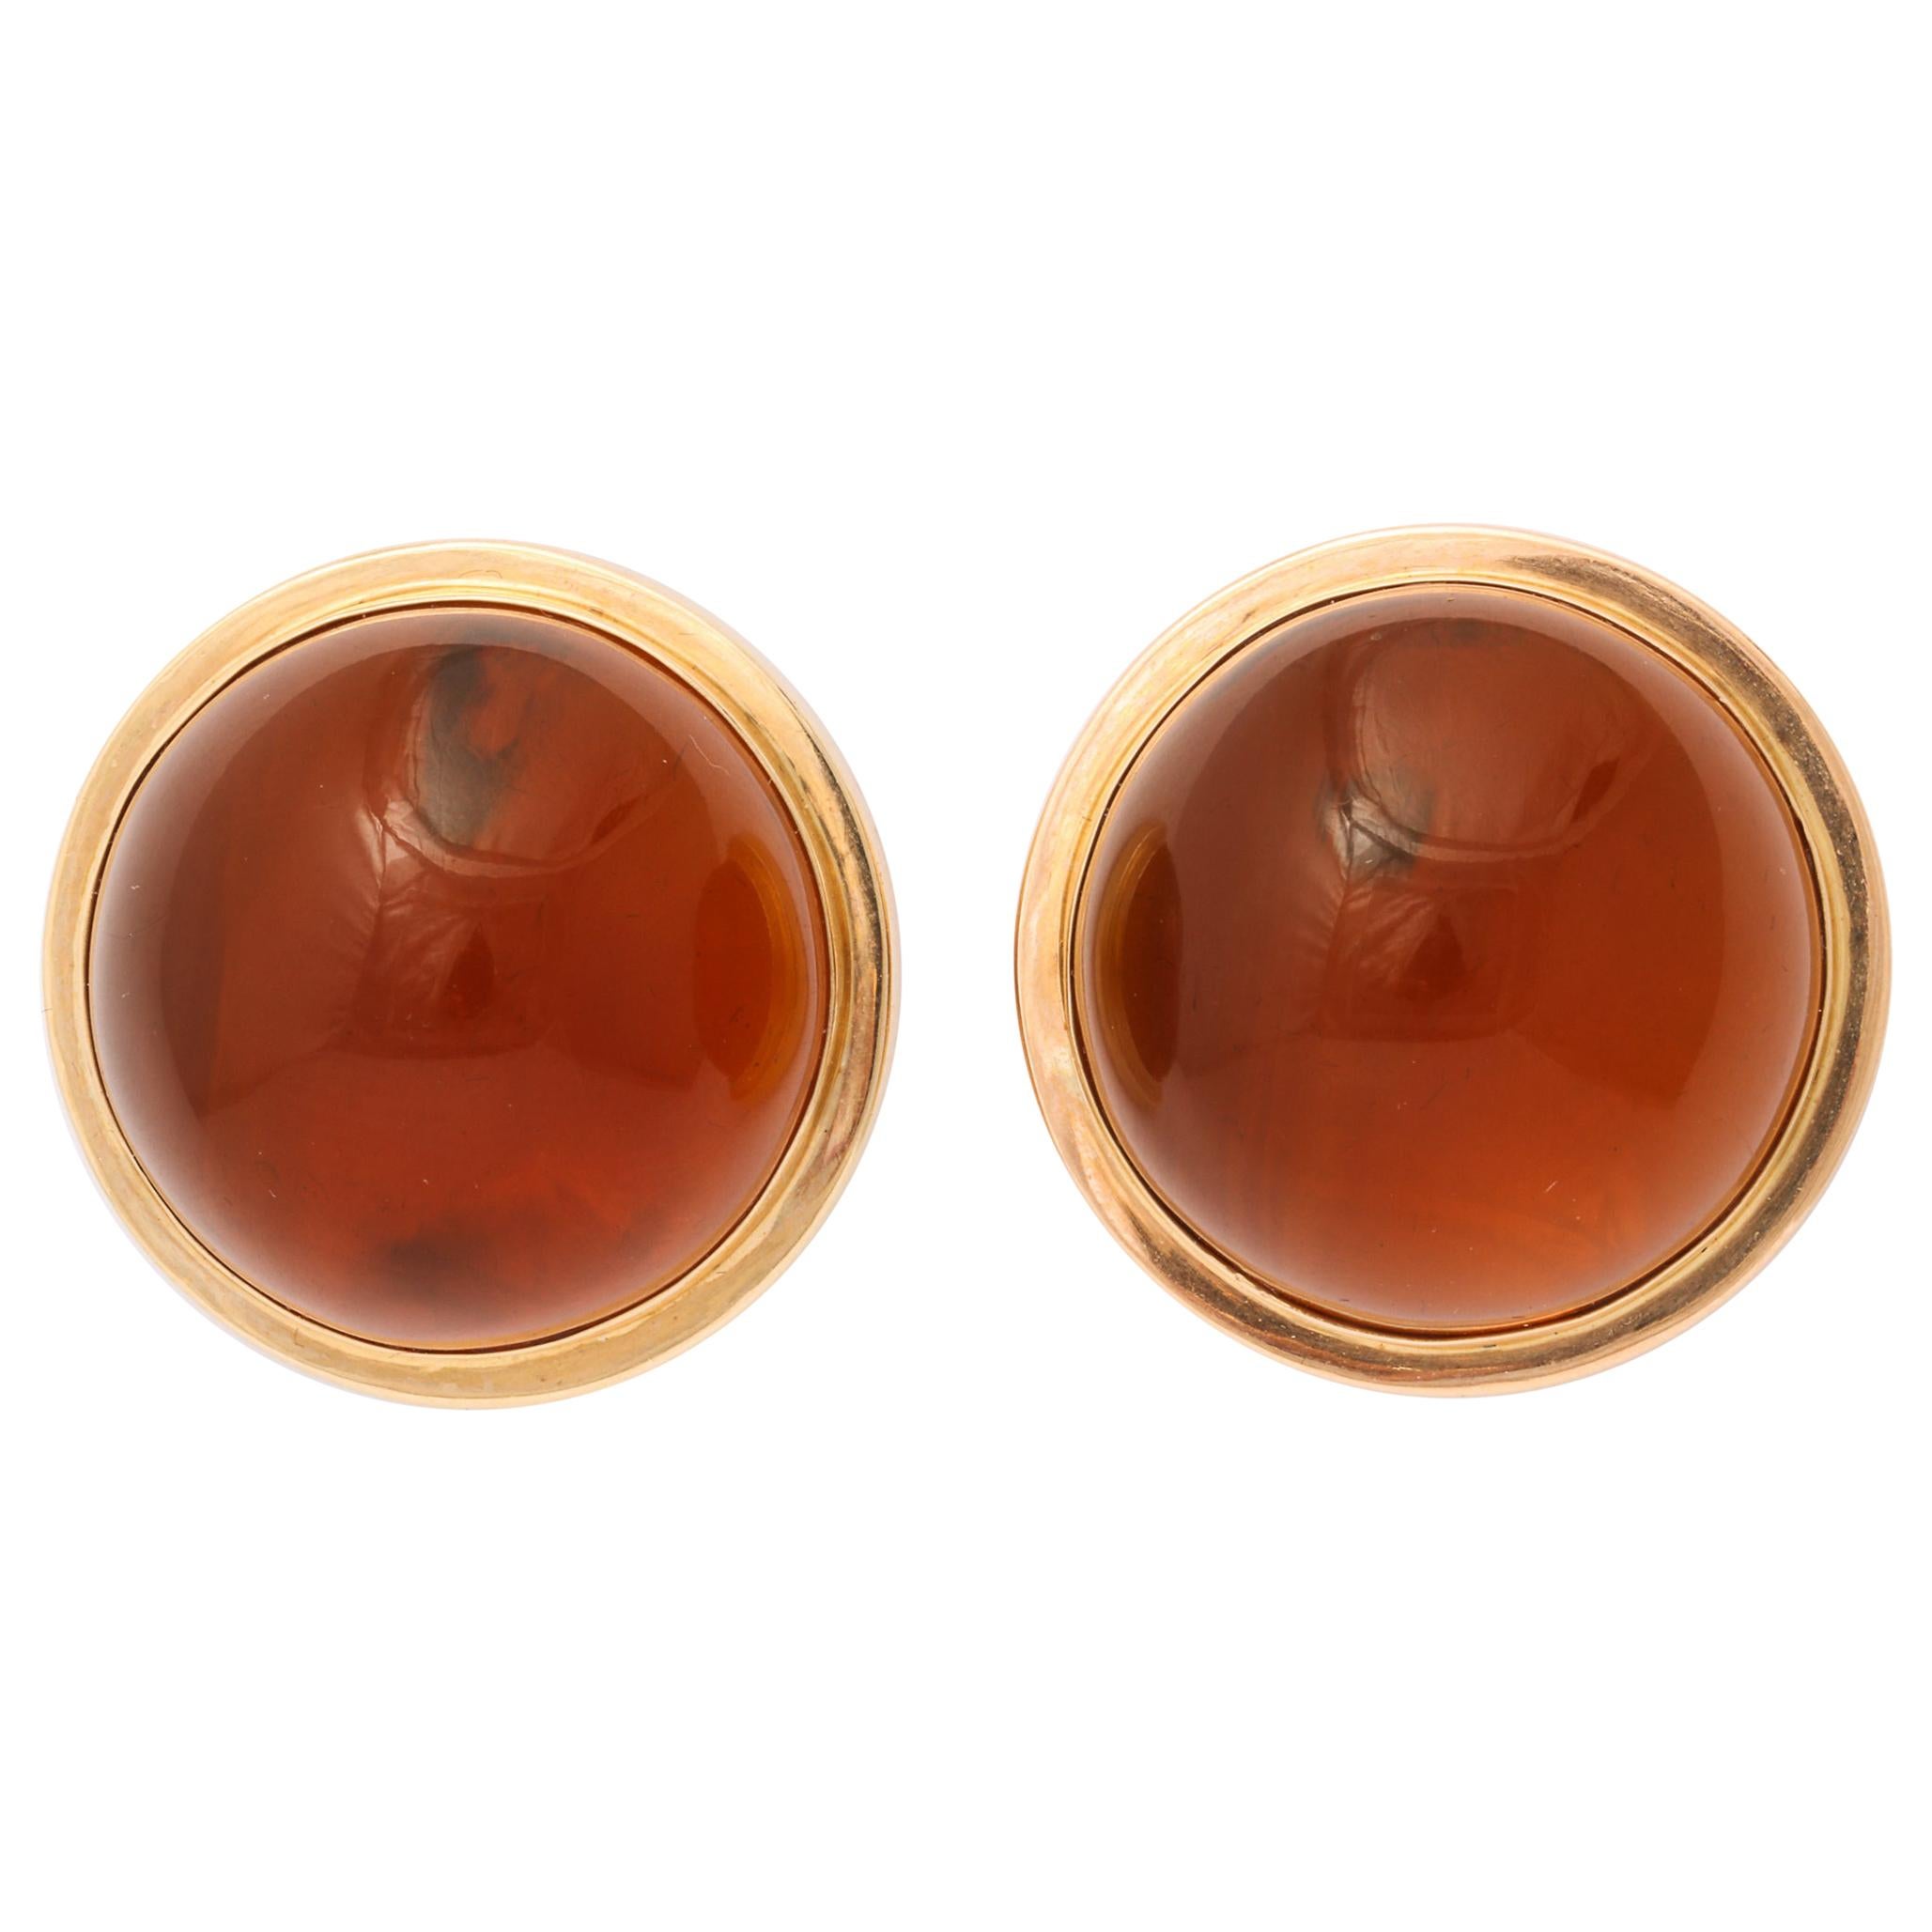 Reconstituted Polished Amber Beads Set in Bezel Setting For Sale